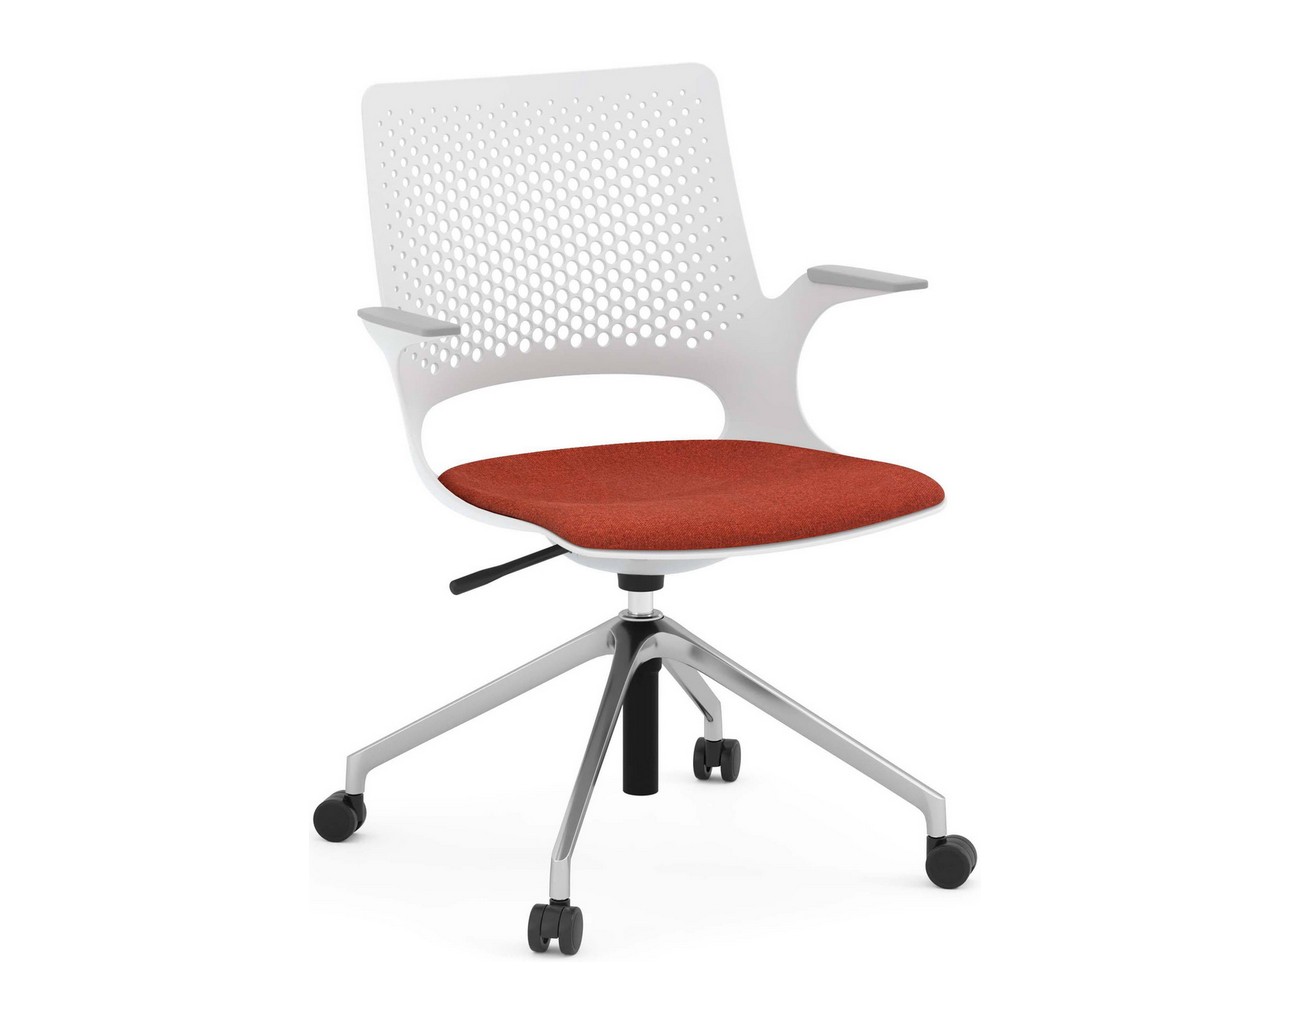 Harmony Multi-Purpose Chair – Polished Aluminum Base and Light Grey Frame with Red Seat